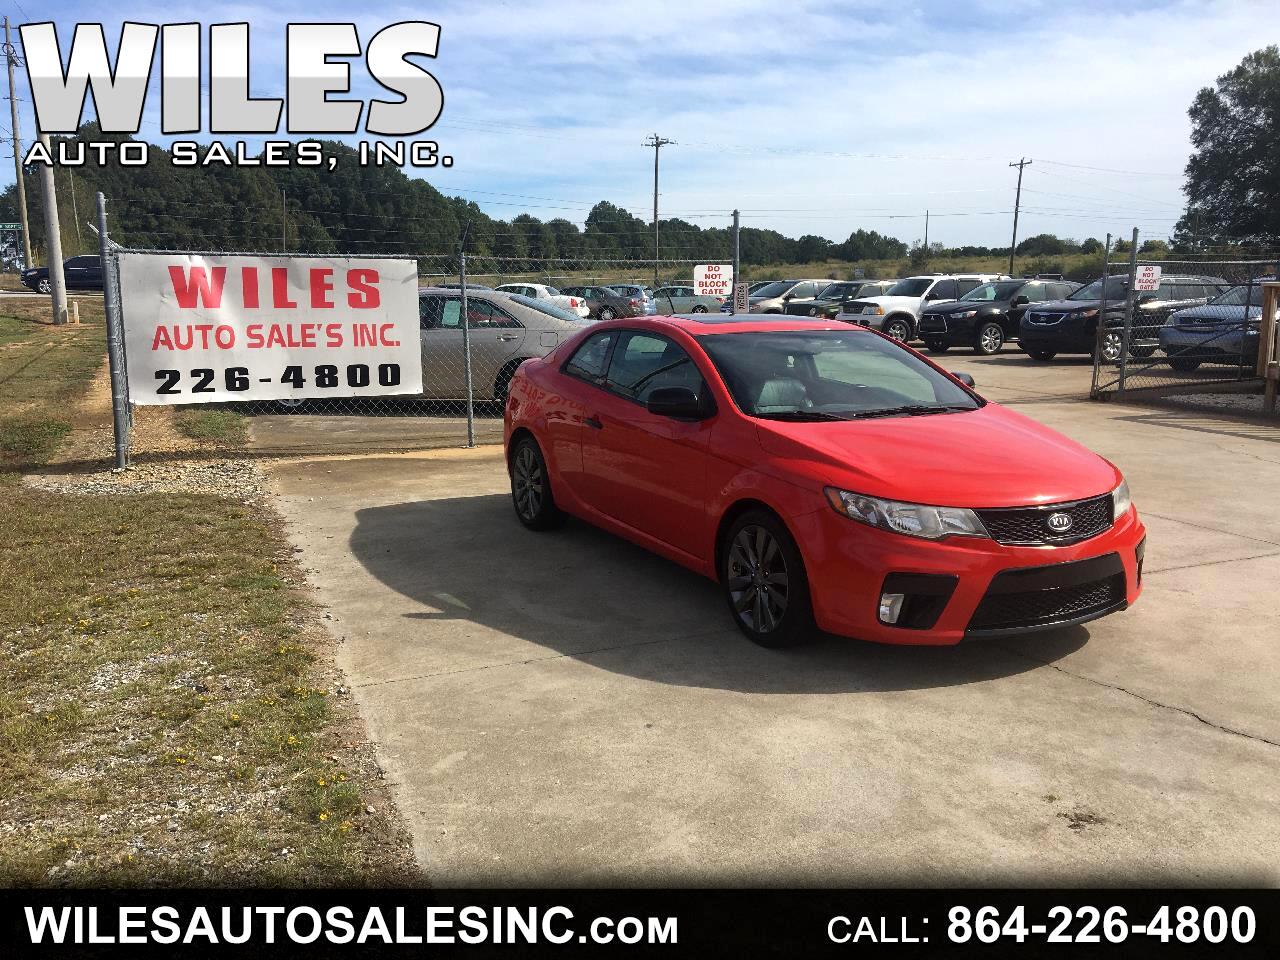 Used 2011 Kia Forte Koup Sx For Sale In Anderson Sc 29626